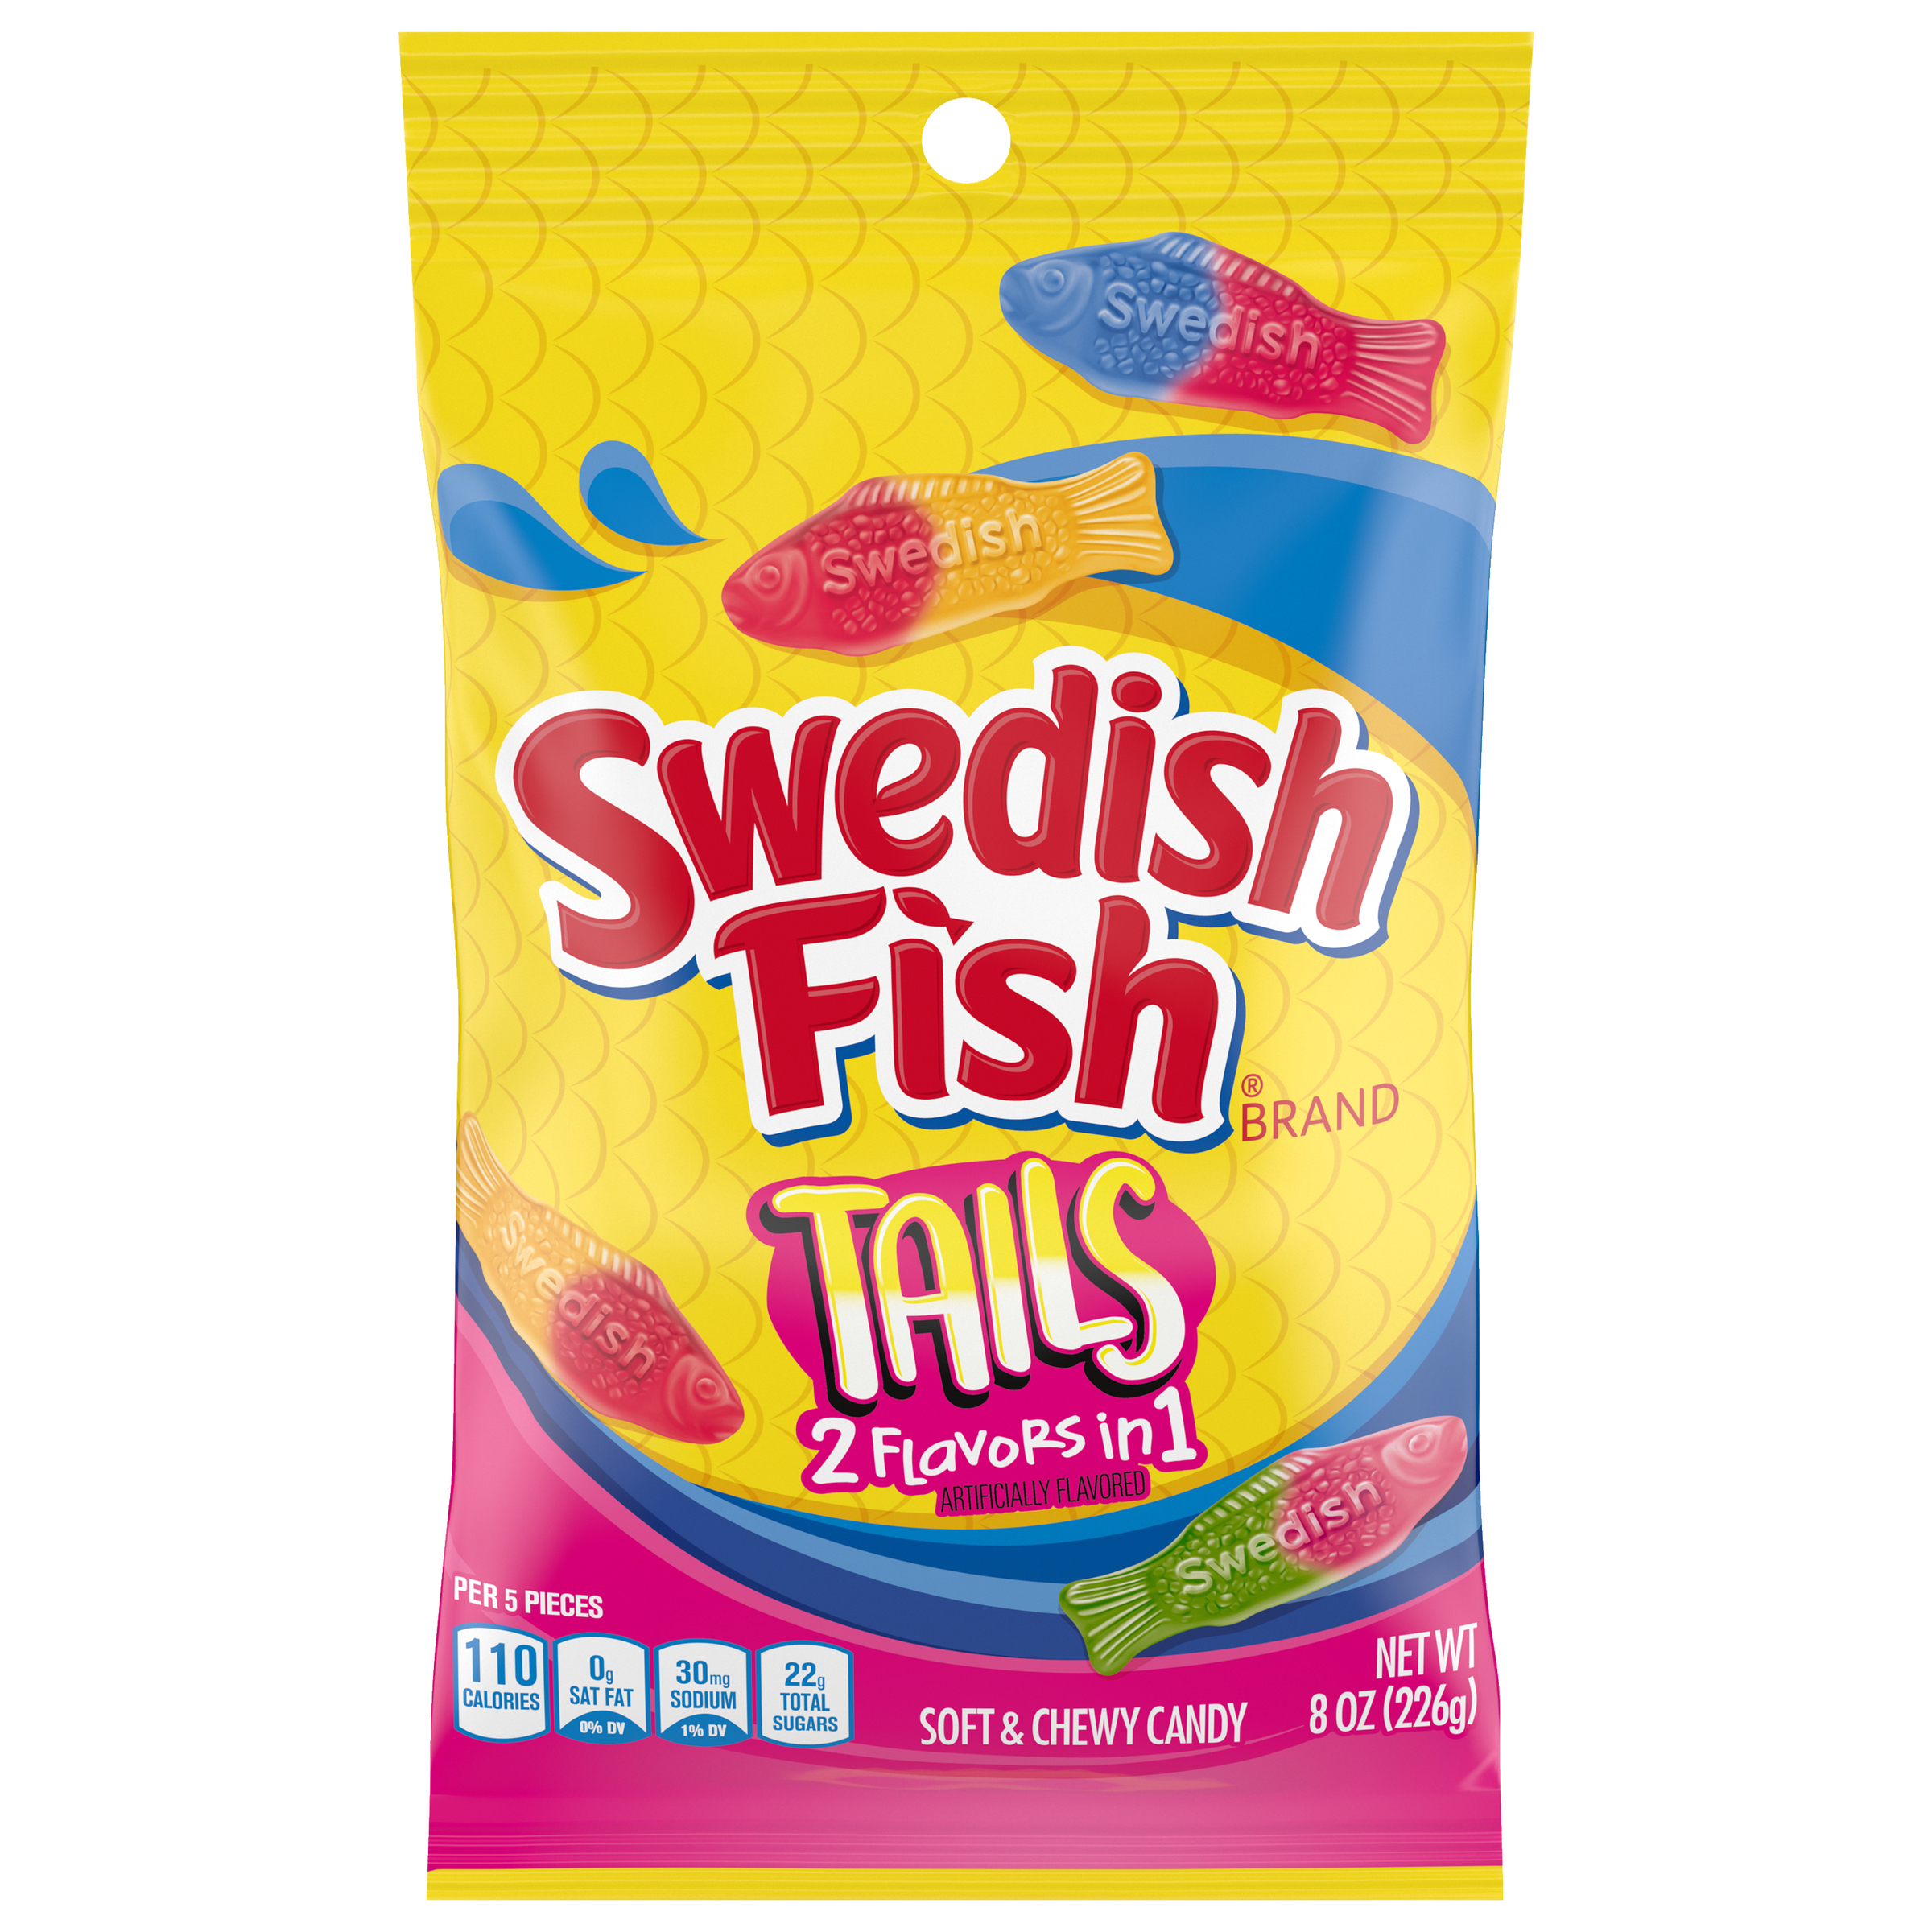 SWEDISH FISH Tails 2 Flavors in 1 Soft & Chewy Candy, 8 oz-thumbnail-1